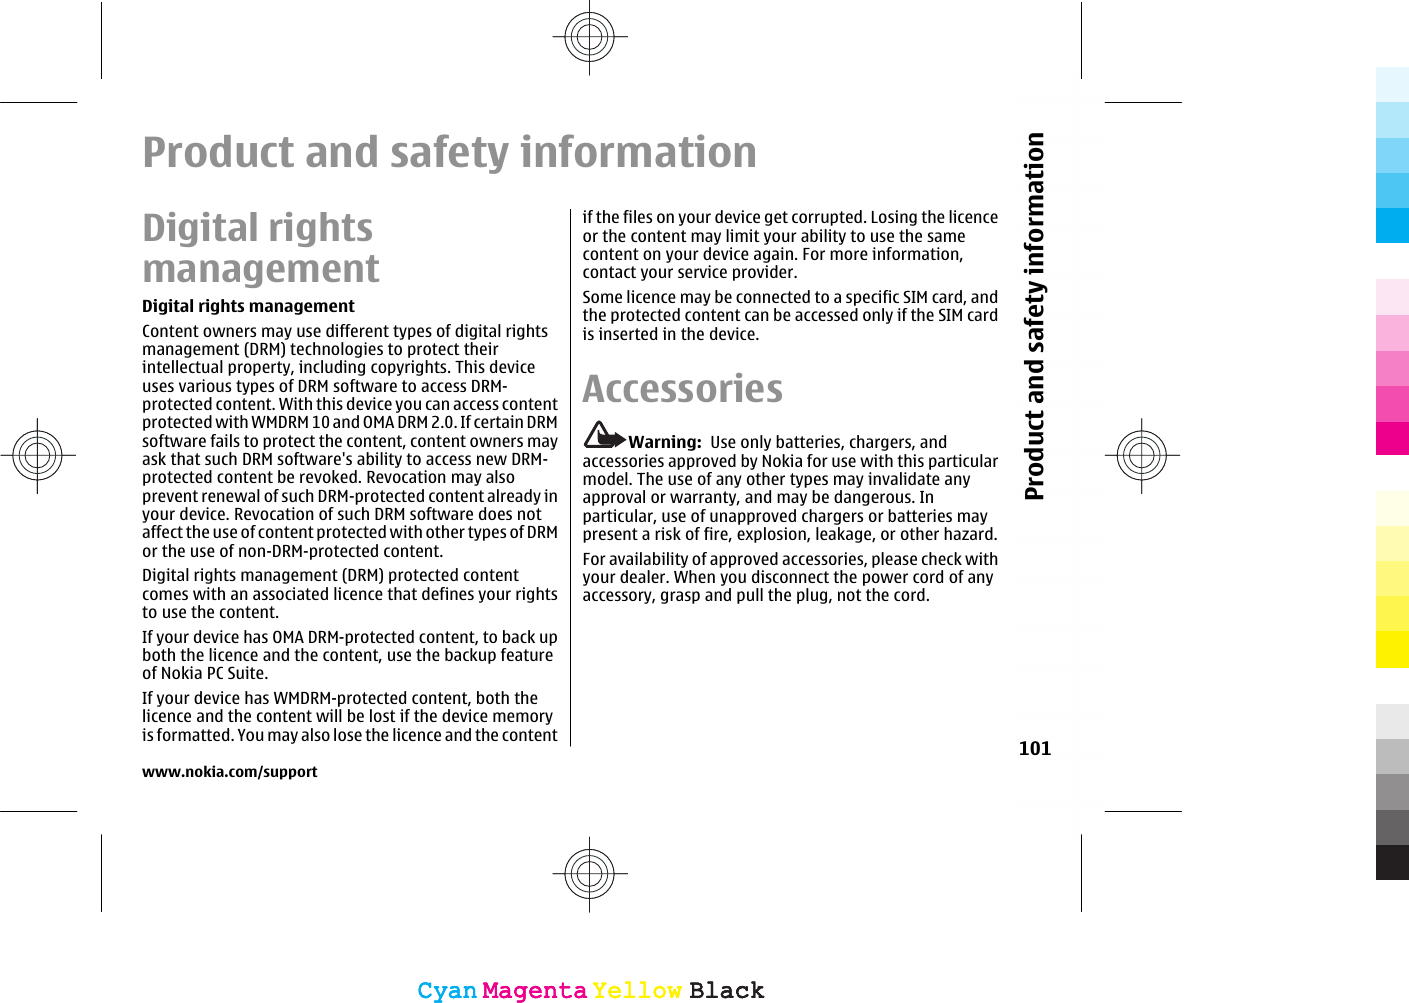 Product and safety informationDigital rightsmanagementDigital rights managementContent owners may use different types of digital rightsmanagement (DRM) technologies to protect theirintellectual property, including copyrights. This deviceuses various types of DRM software to access DRM-protected content. With this device you can access contentprotected with WMDRM 10 and OMA DRM 2.0. If certain DRMsoftware fails to protect the content, content owners mayask that such DRM software&apos;s ability to access new DRM-protected content be revoked. Revocation may alsoprevent renewal of such DRM-protected content already inyour device. Revocation of such DRM software does notaffect the use of content protected with other types of DRMor the use of non-DRM-protected content.Digital rights management (DRM) protected contentcomes with an associated licence that defines your rightsto use the content.If your device has OMA DRM-protected content, to back upboth the licence and the content, use the backup featureof Nokia PC Suite.If your device has WMDRM-protected content, both thelicence and the content will be lost if the device memoryis formatted. You may also lose the licence and the contentif the files on your device get corrupted. Losing the licenceor the content may limit your ability to use the samecontent on your device again. For more information,contact your service provider.Some licence may be connected to a specific SIM card, andthe protected content can be accessed only if the SIM cardis inserted in the device.AccessoriesWarning:  Use only batteries, chargers, andaccessories approved by Nokia for use with this particularmodel. The use of any other types may invalidate anyapproval or warranty, and may be dangerous. Inparticular, use of unapproved chargers or batteries maypresent a risk of fire, explosion, leakage, or other hazard.For availability of approved accessories, please check withyour dealer. When you disconnect the power cord of anyaccessory, grasp and pull the plug, not the cord.www.nokia.com/support101Product and safety informationCyanCyanMagentaMagentaYellowYellowBlackBlackCyanCyanMagentaMagentaYellowYellowBlackBlack